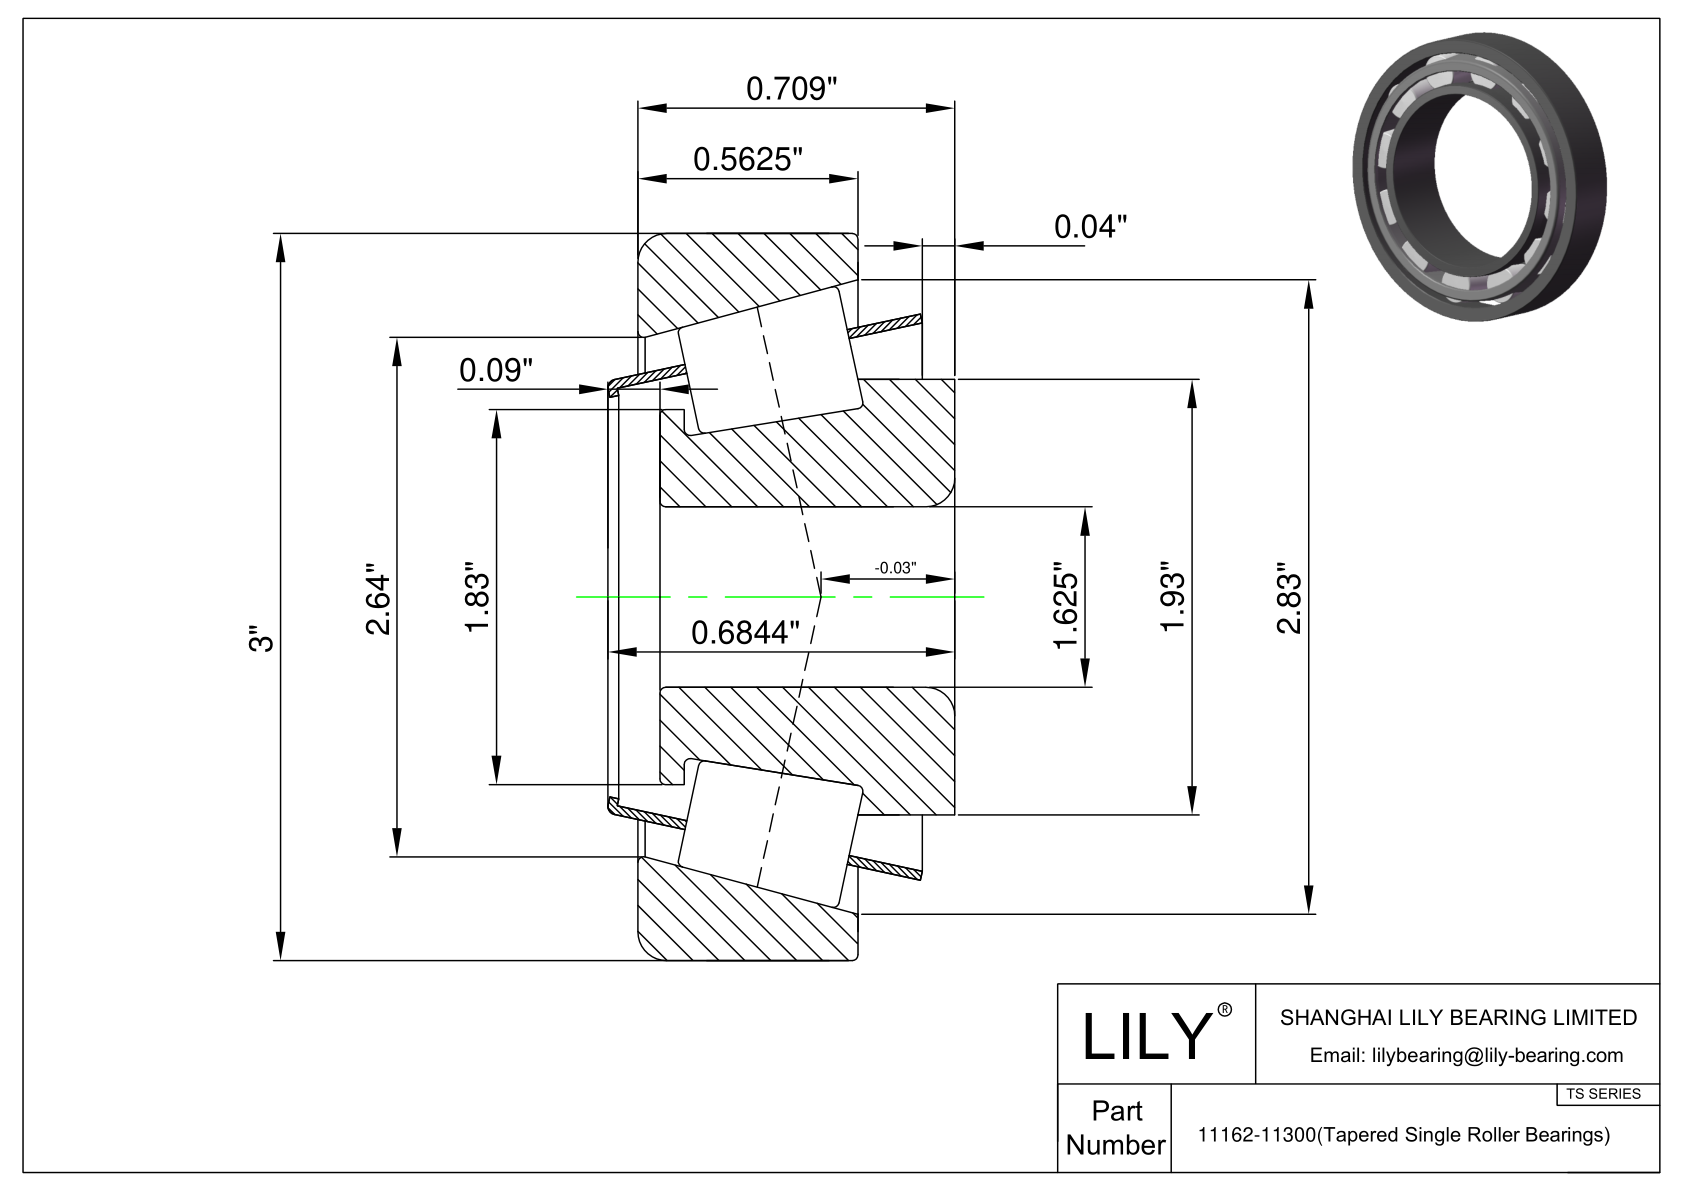 11162-11300 TS (Tapered Single Roller Bearings) (Imperial) cad drawing